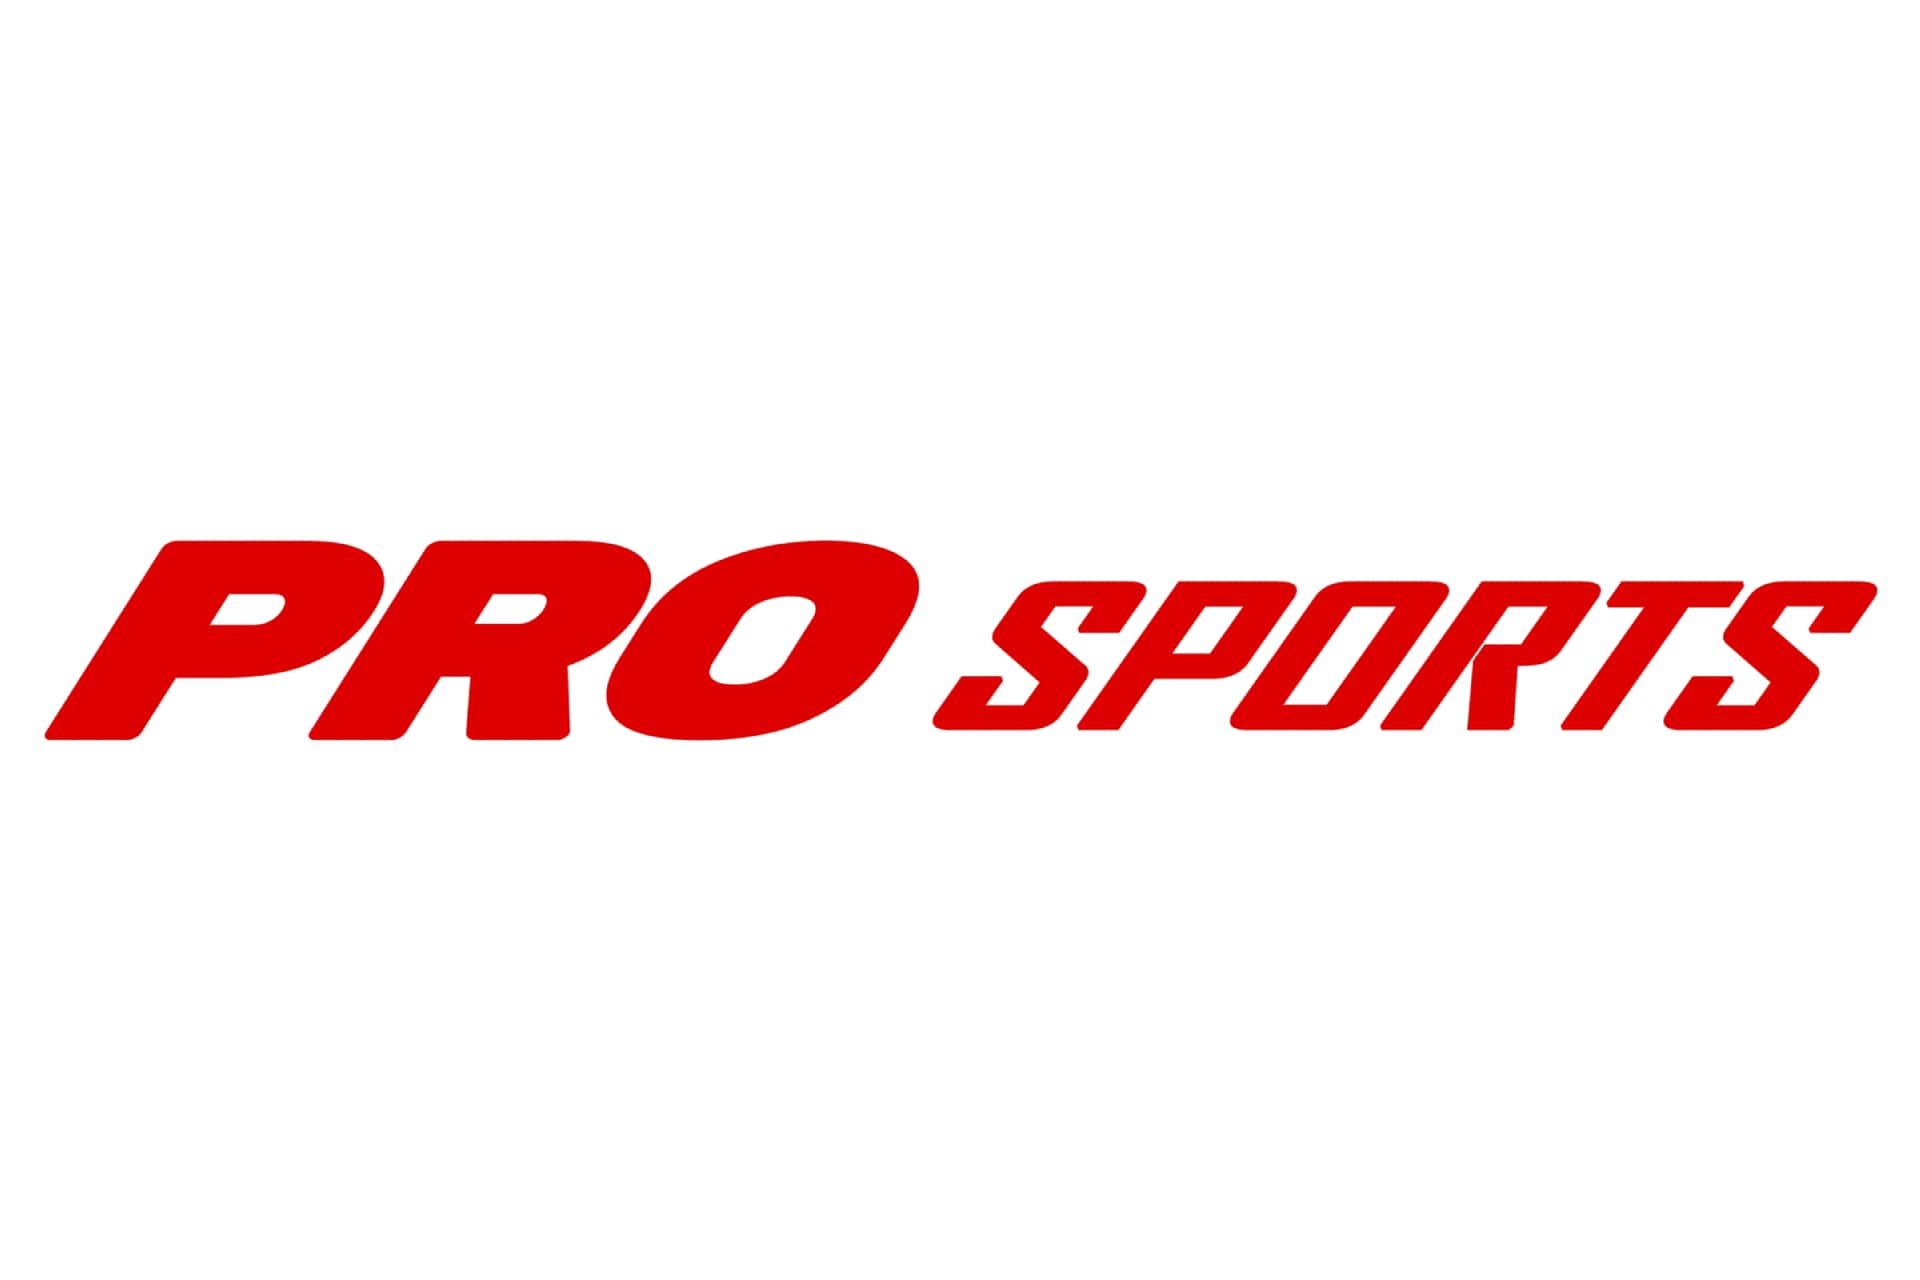 Contact PROSPORTS - contact information, mailing address, contact form